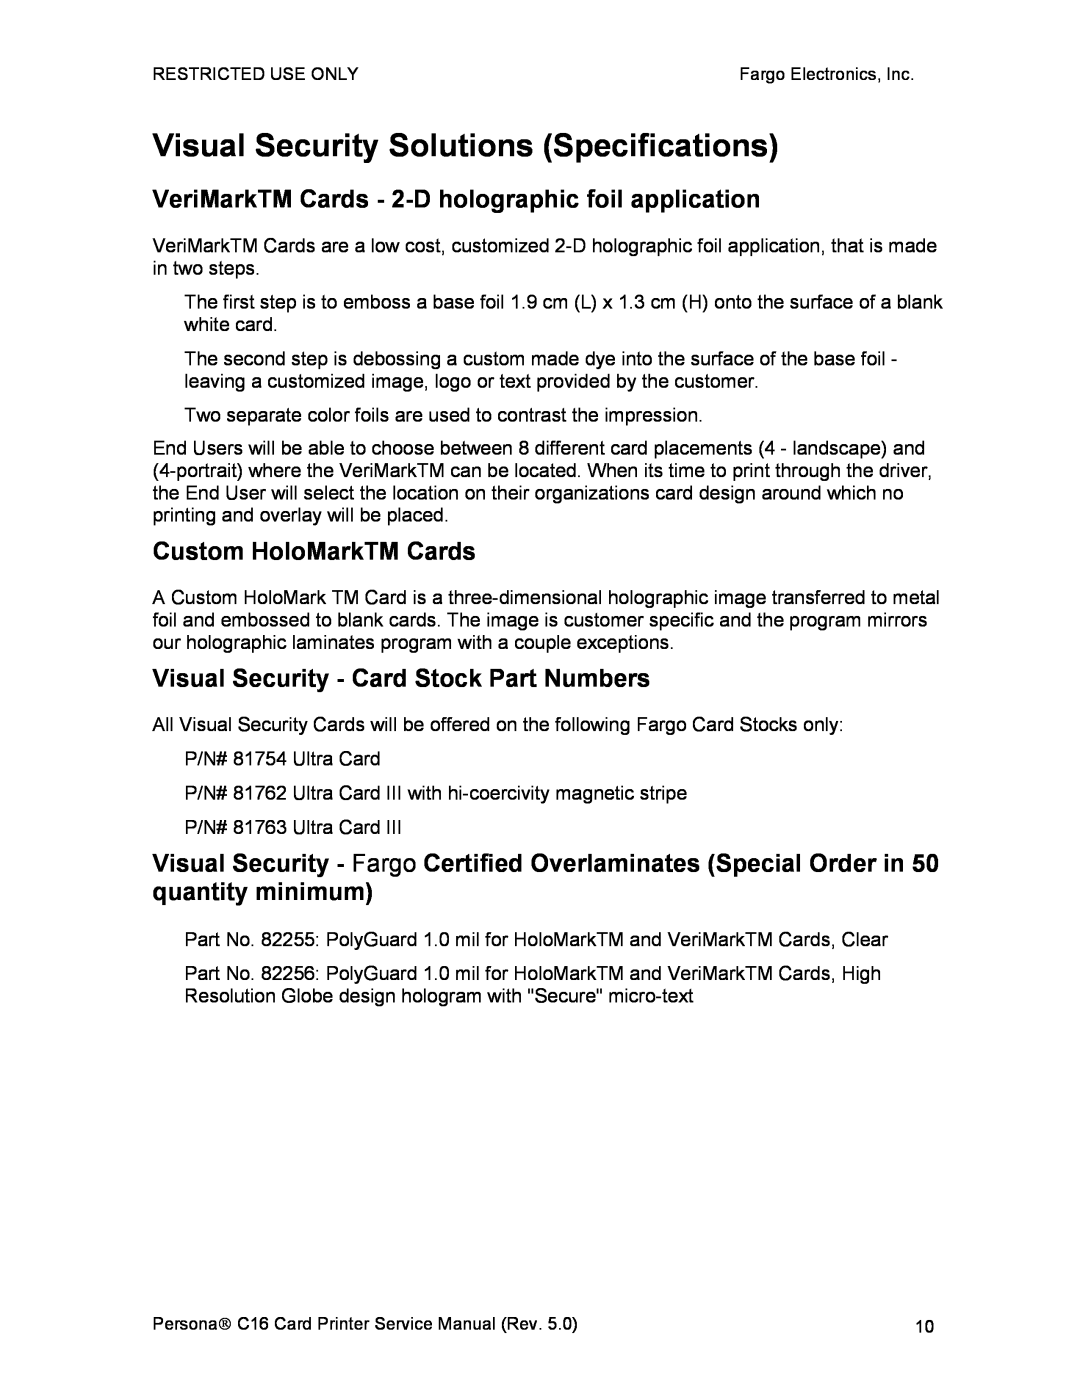 FARGO electronic C16 Visual Security Solutions Specifications, VeriMarkTM Cards - 2-D holographic foil application 